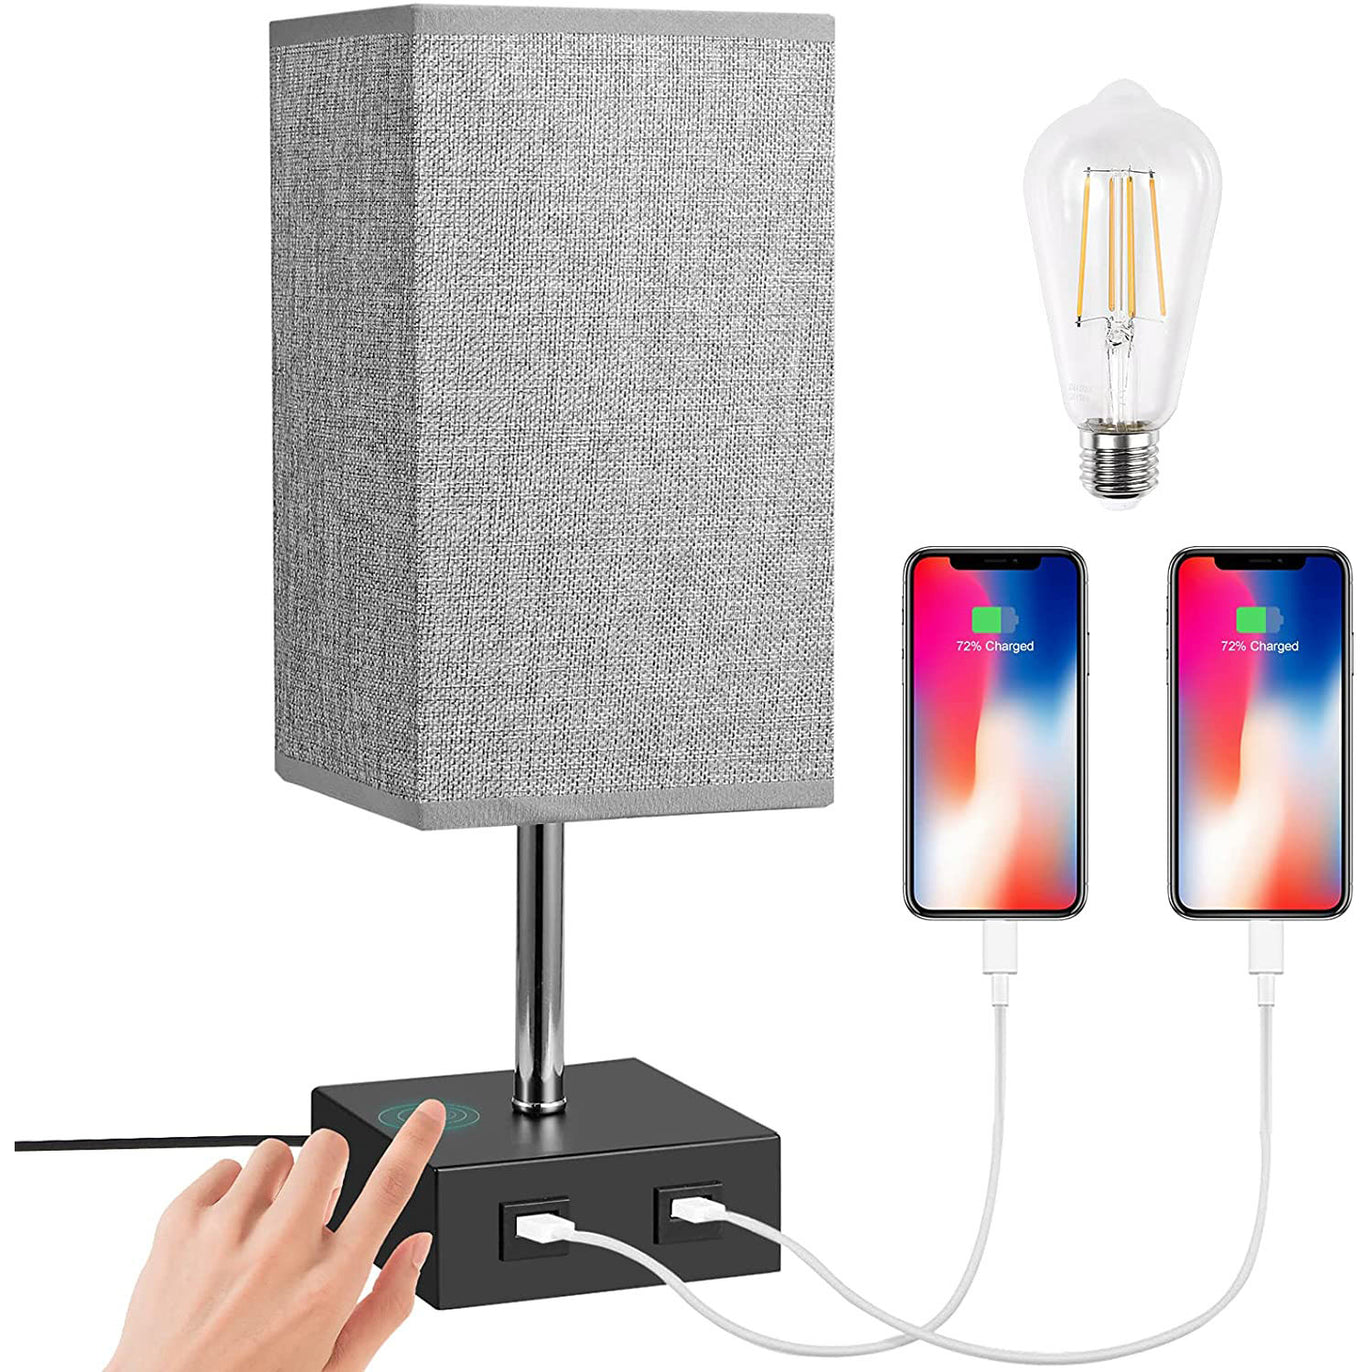 PROZOR Touch Control Table Lamp